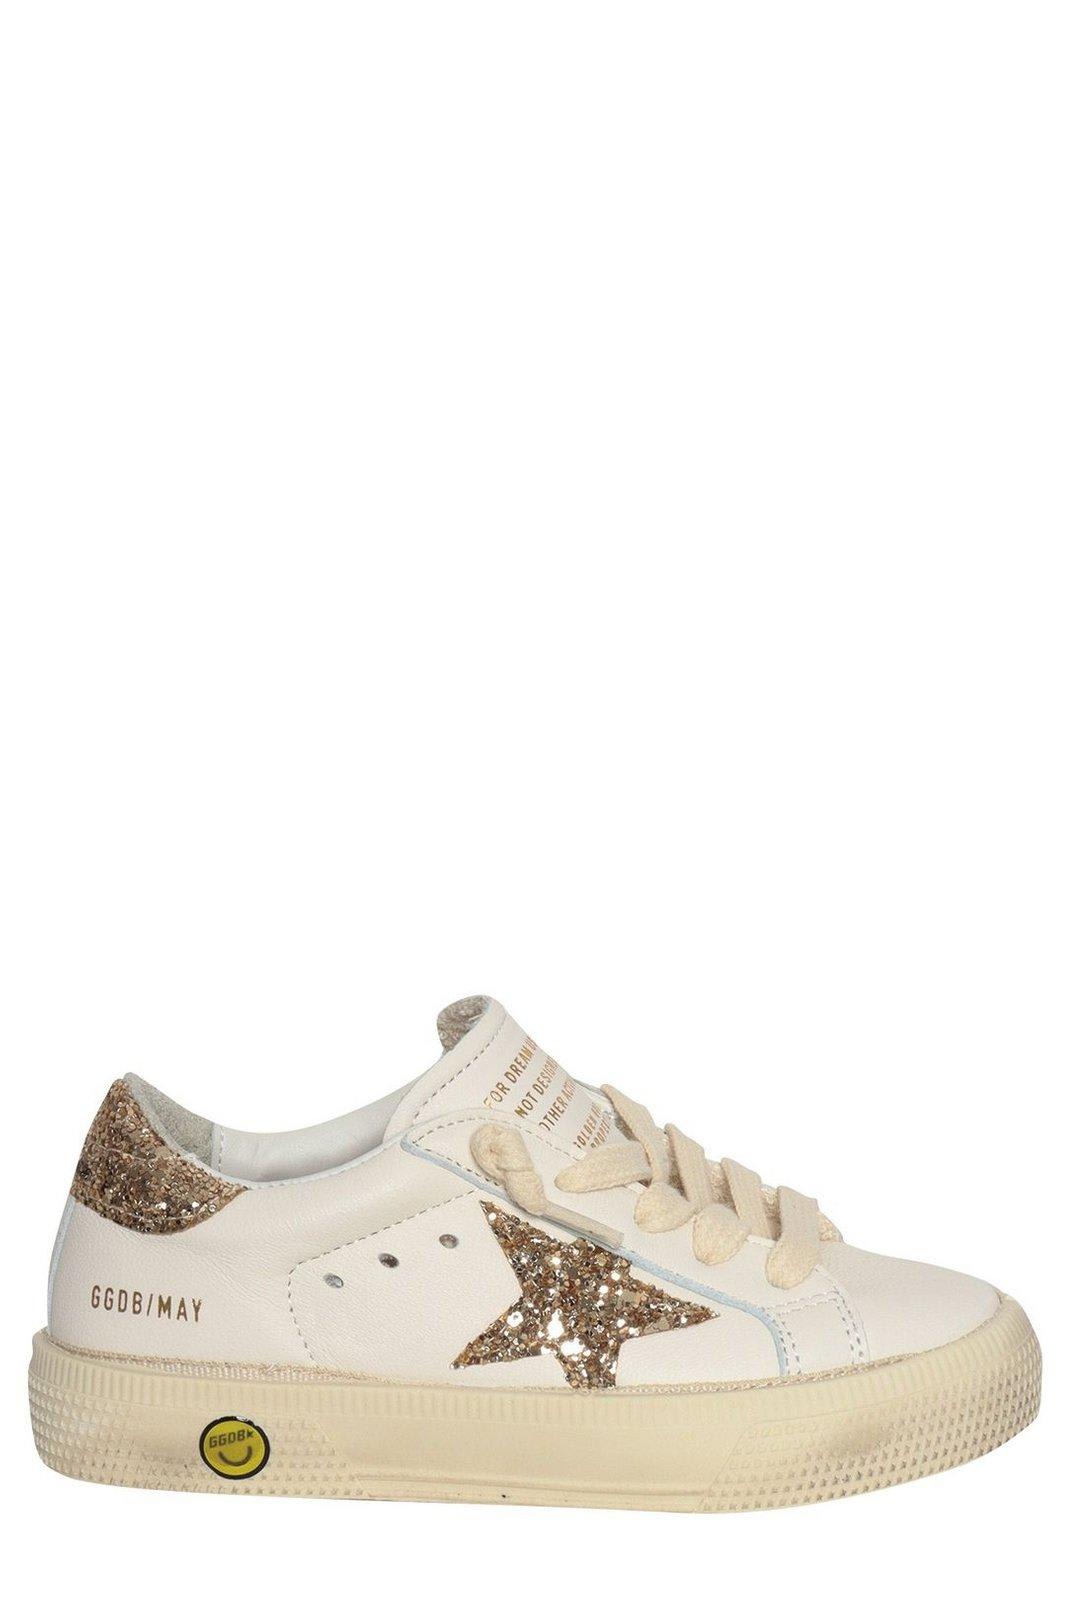 Golden Goose May Star Distressed Low-top Sneakers